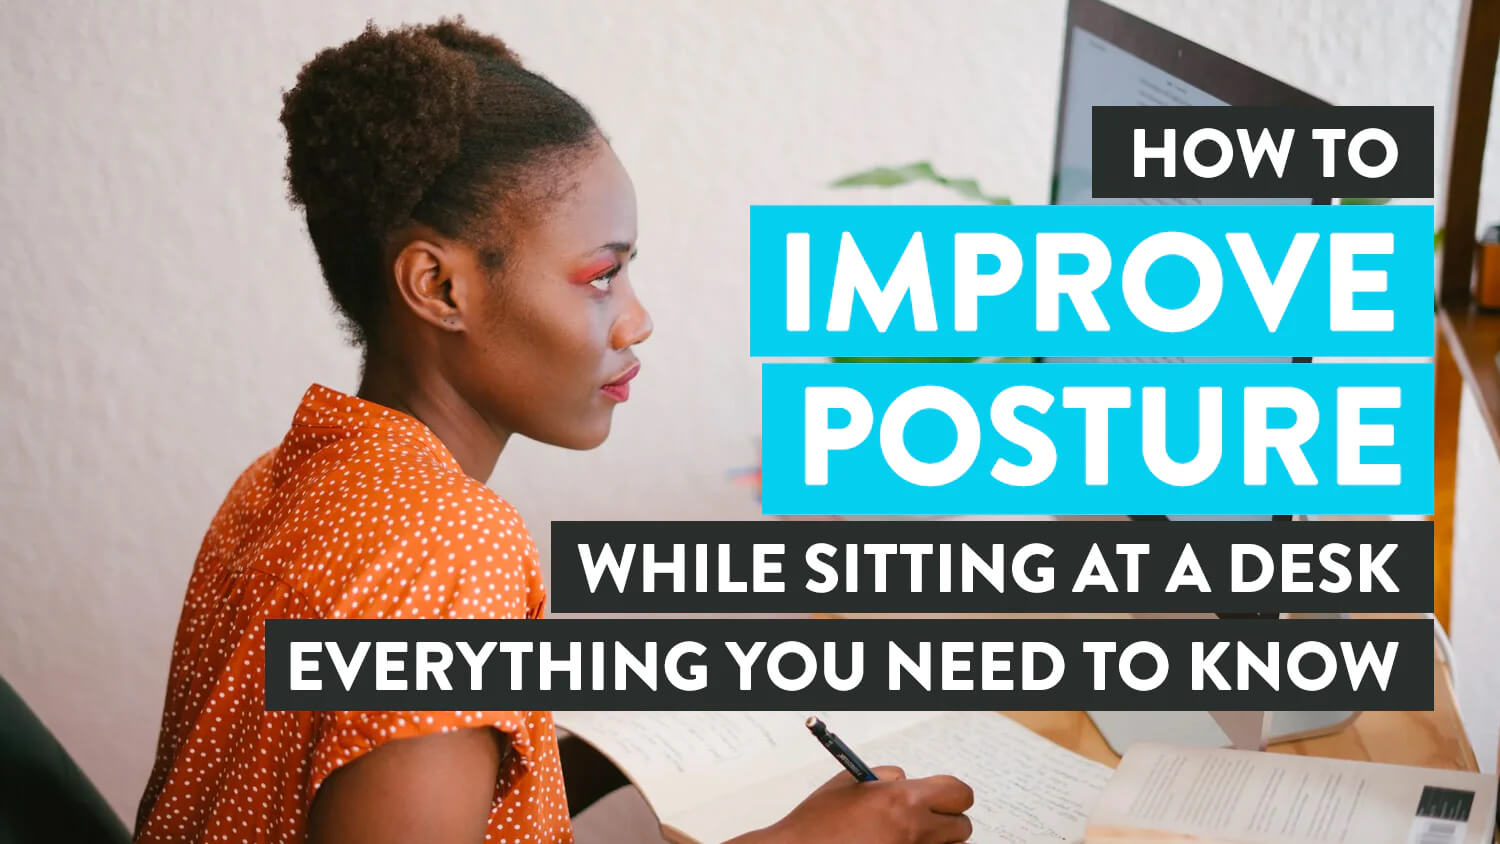 How to Improve Posture While Sitting at Desk: A Brief Guide